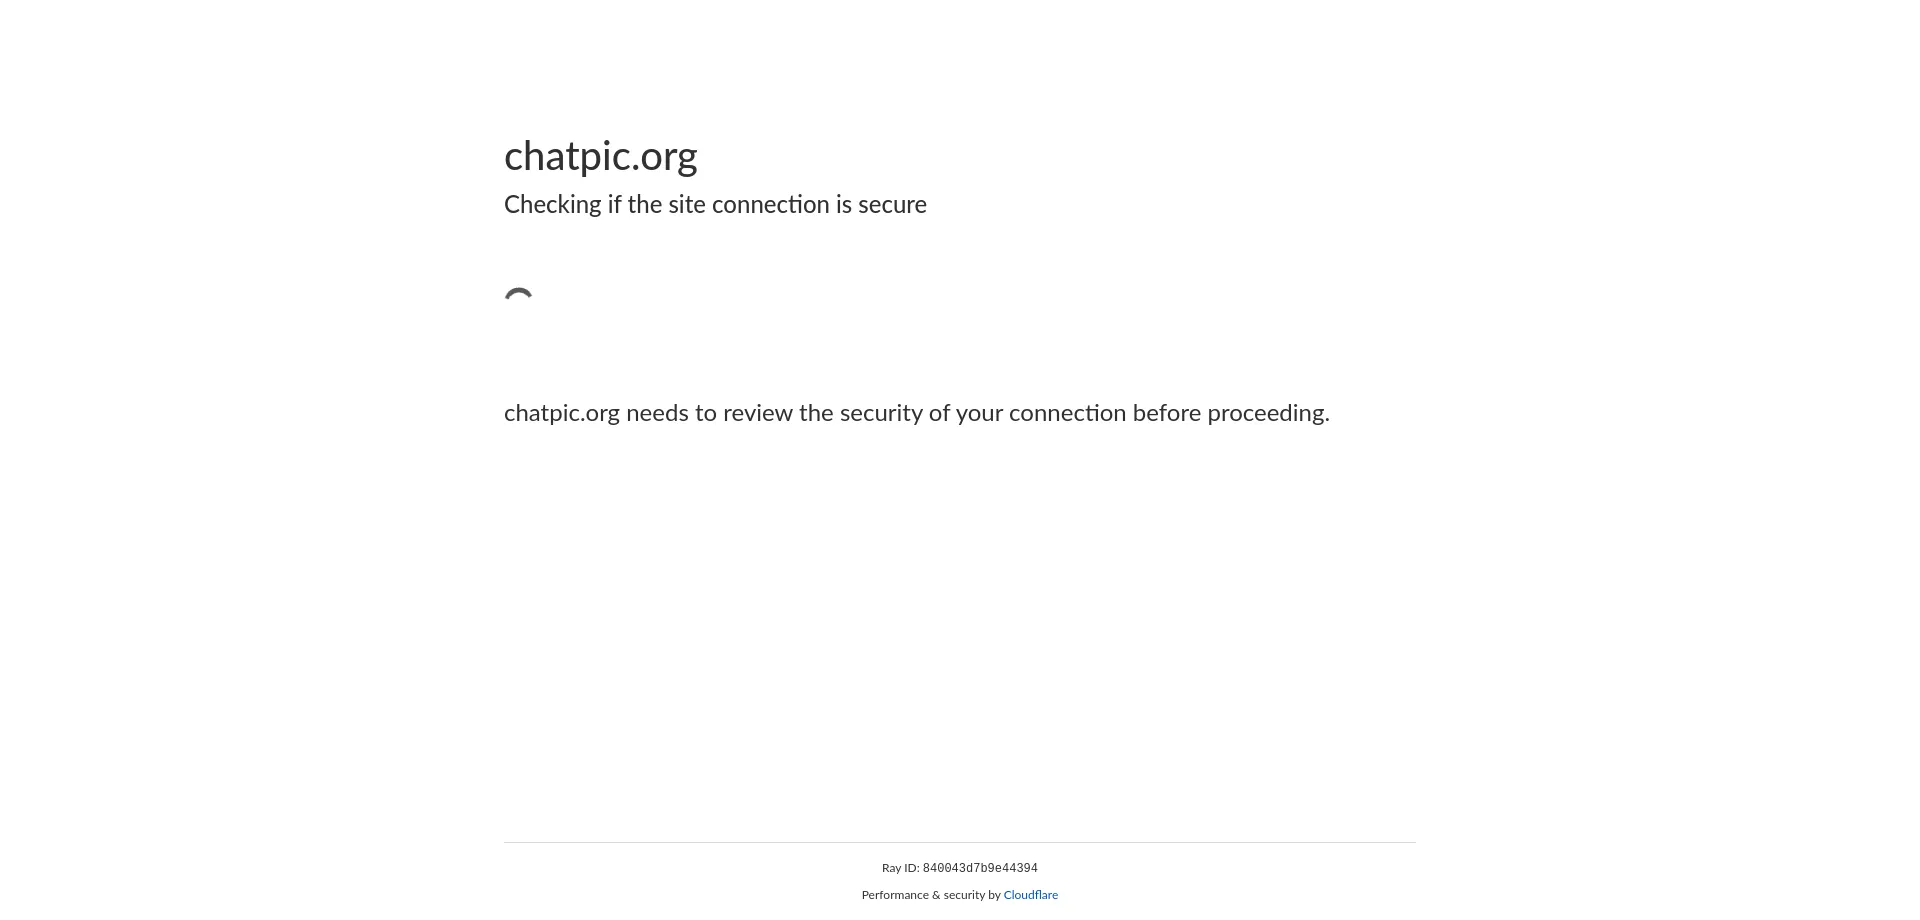 Chatpic.org